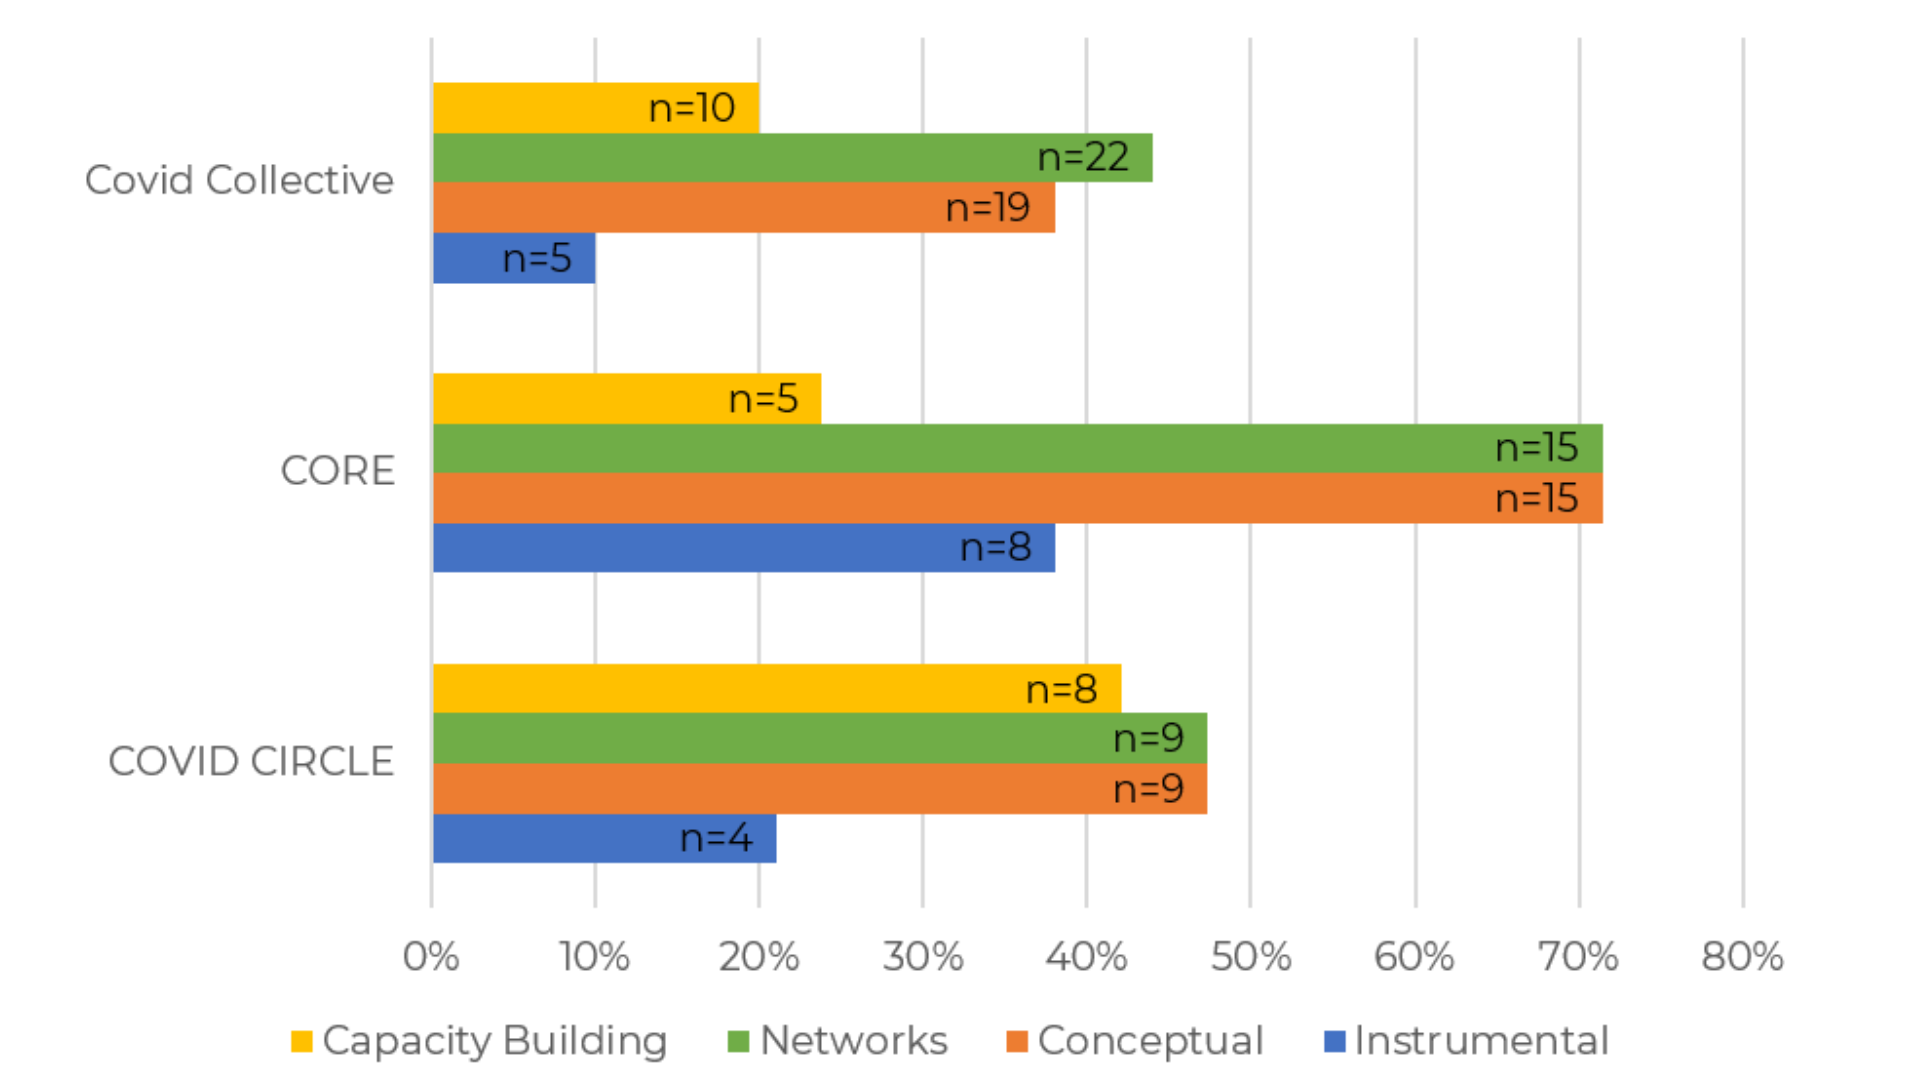 Graph showcasing teh percentage of project reporting outcomes for each initiative. The graph is showing the three projects: Covid Collective, CORE and the Covid Circle and the number of outcomes they had for four categories: capacity building, networks, conceptual and instrumental.